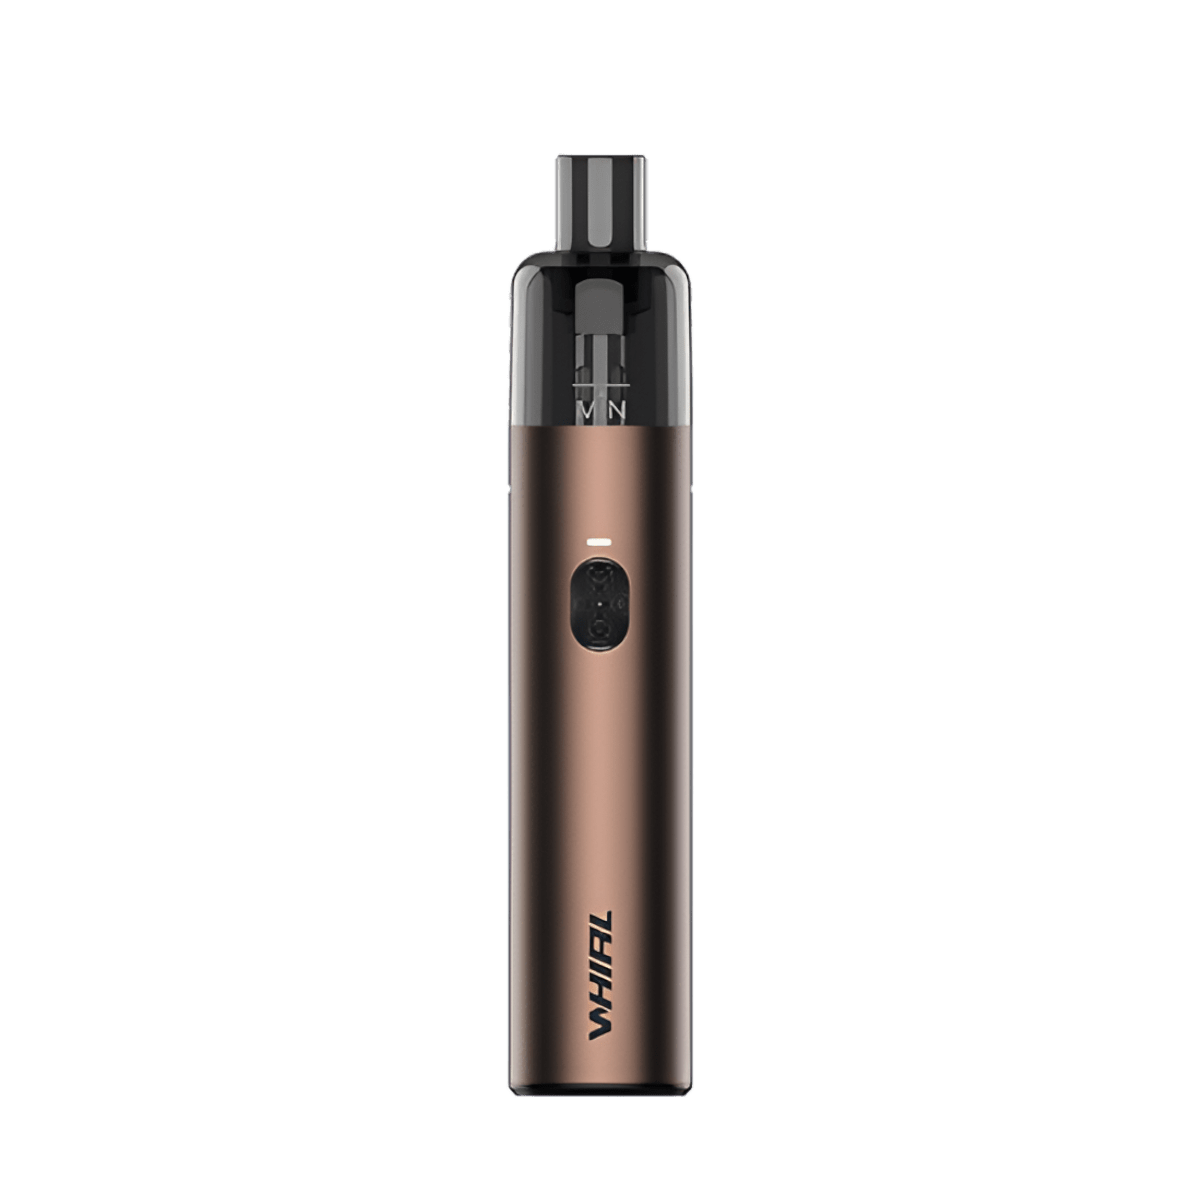 Uwell Whirl S2 Pod System Kit Brown  